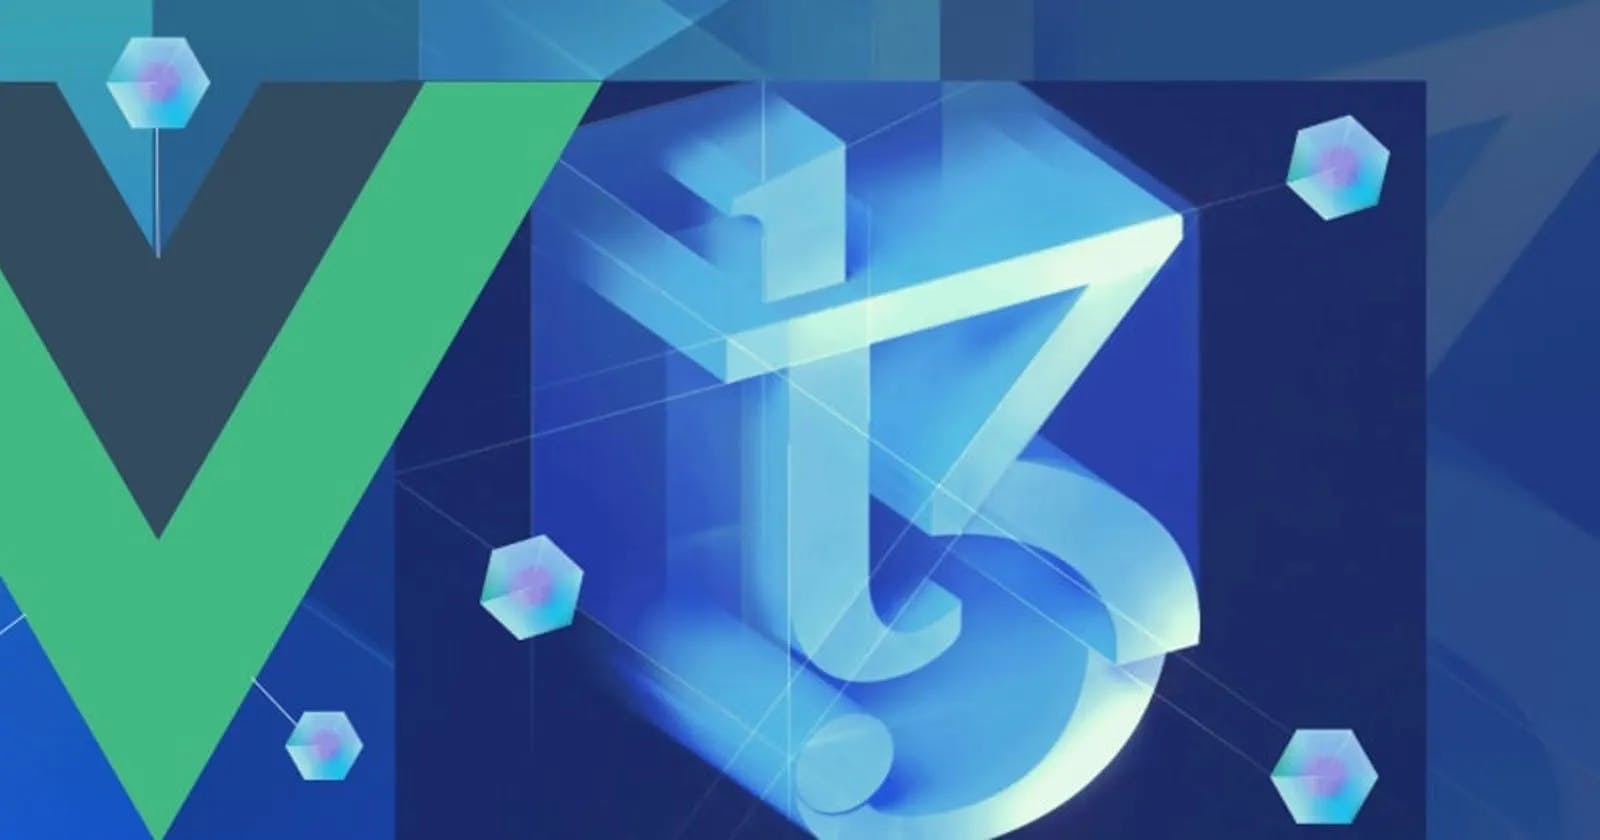 Creating a Blockchain Decentralized App with Vue and Tezos